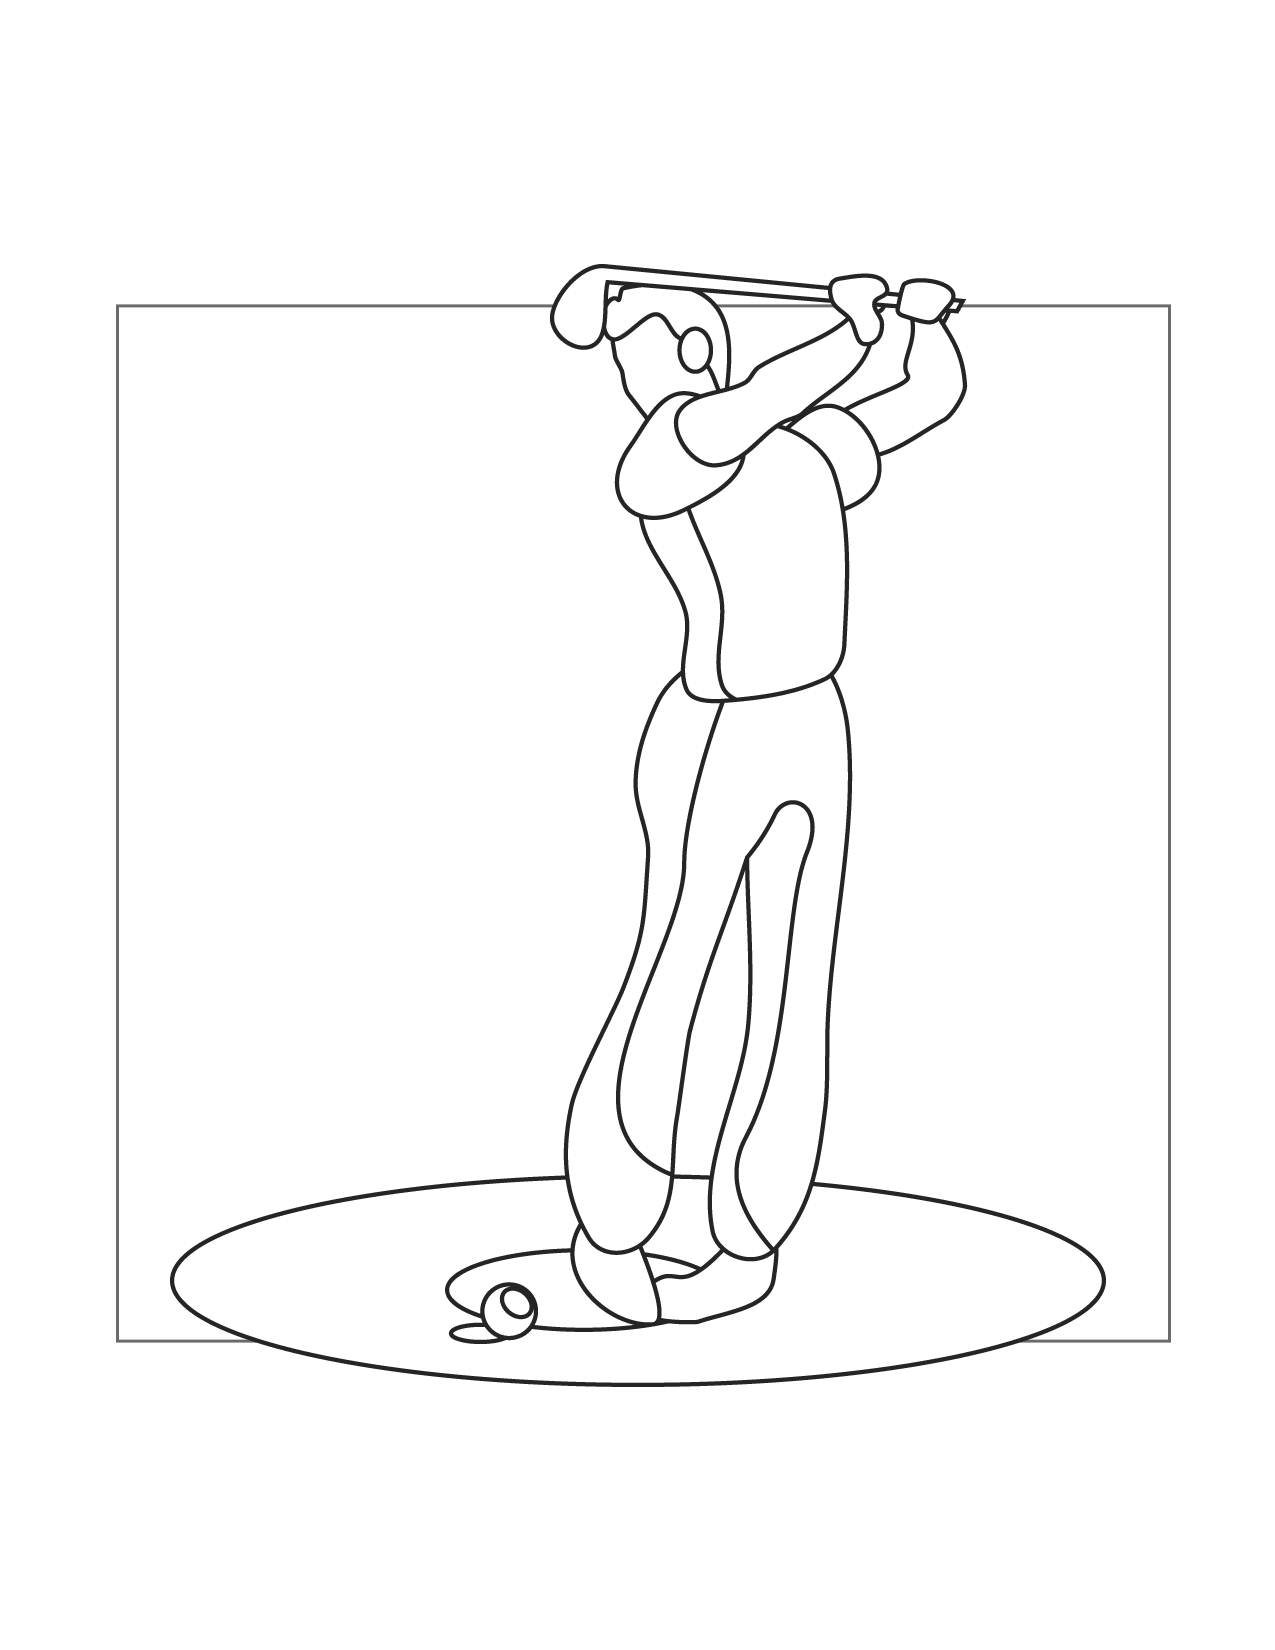 Golf Swing Coloring Page